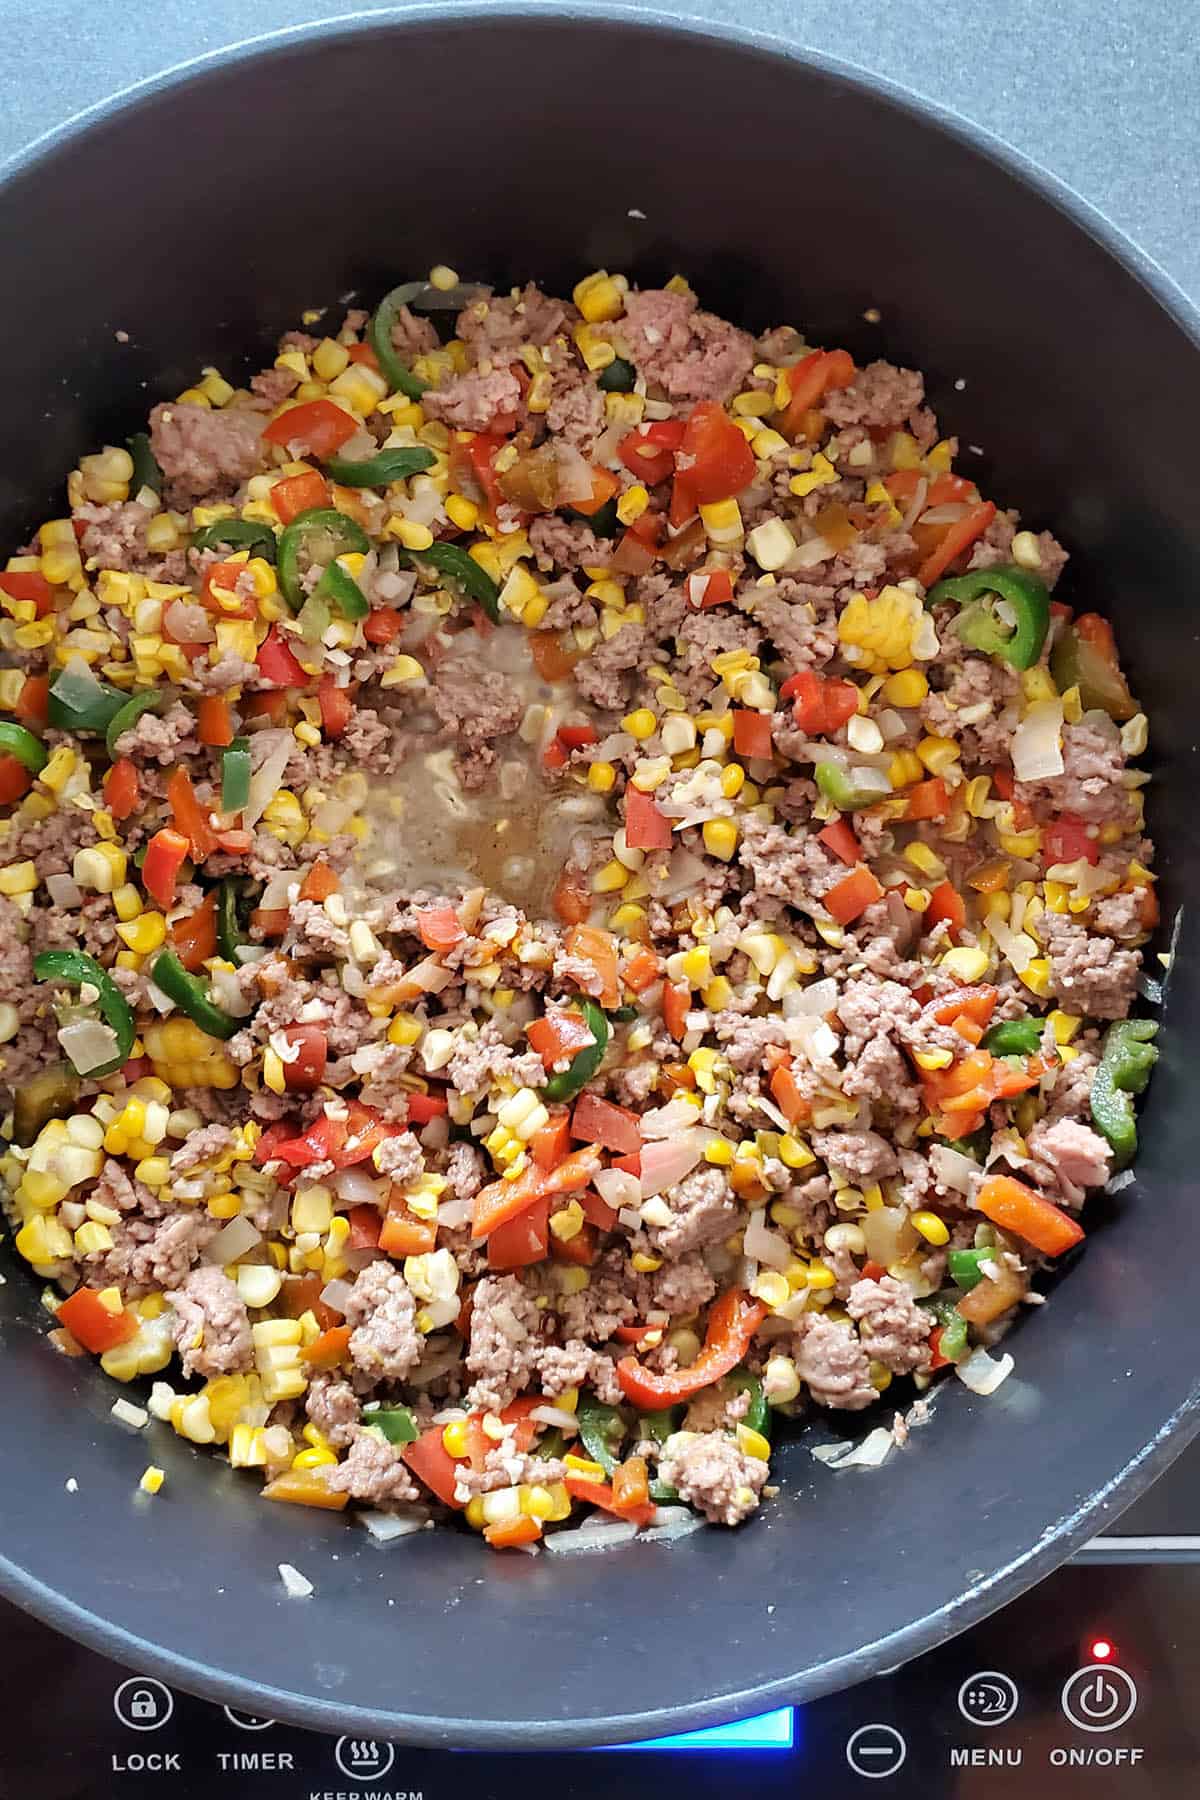 Meat and vegetables cooked down to make taco soup